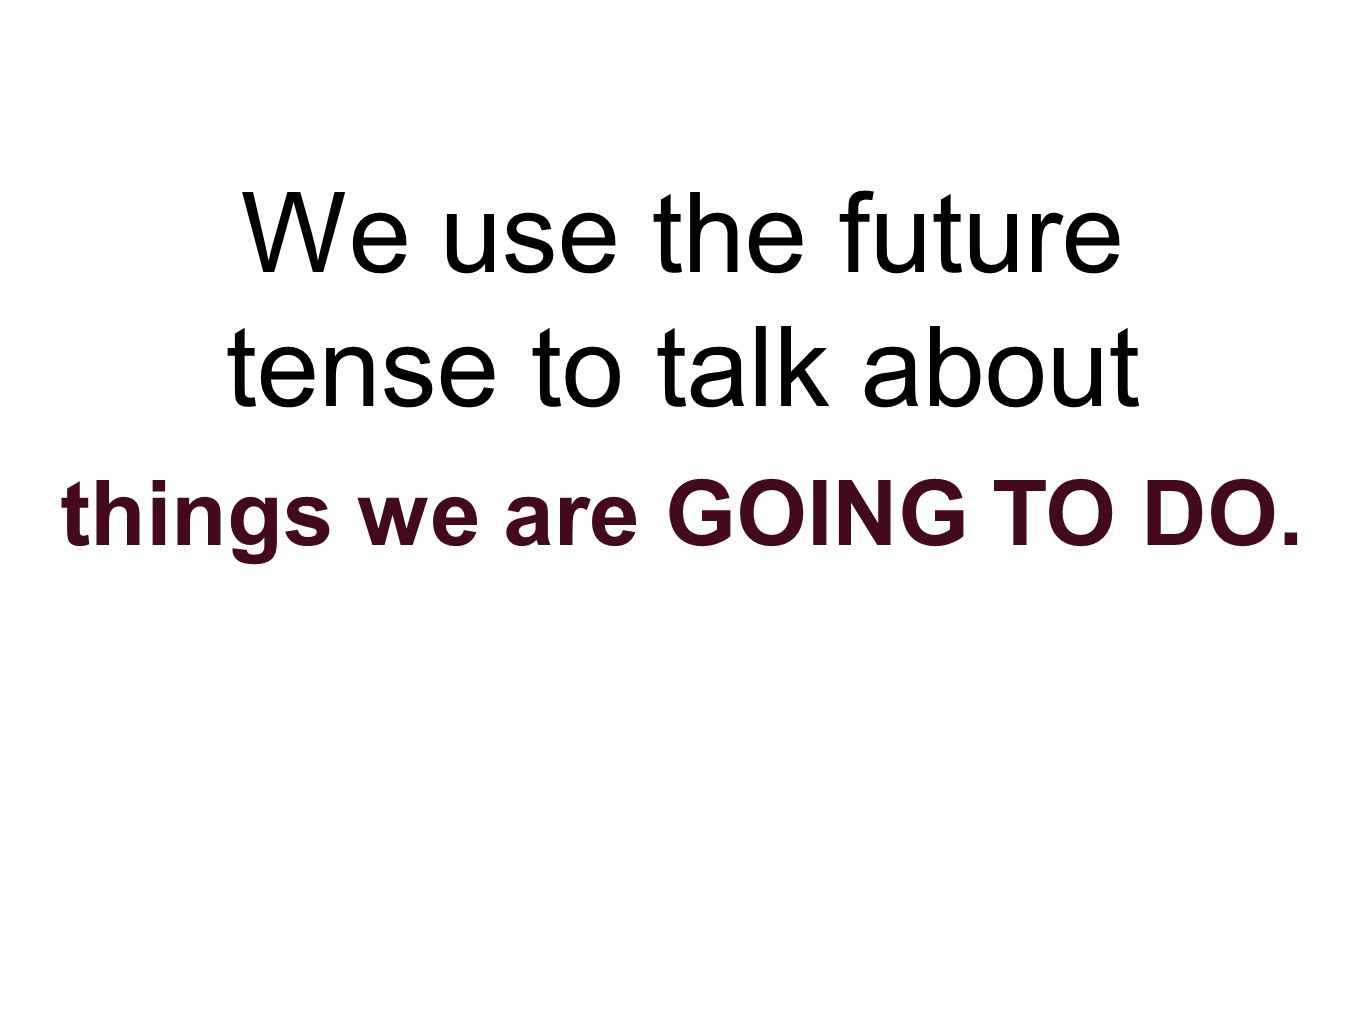 We use the future tense to talk about things we are GOING TO DO.